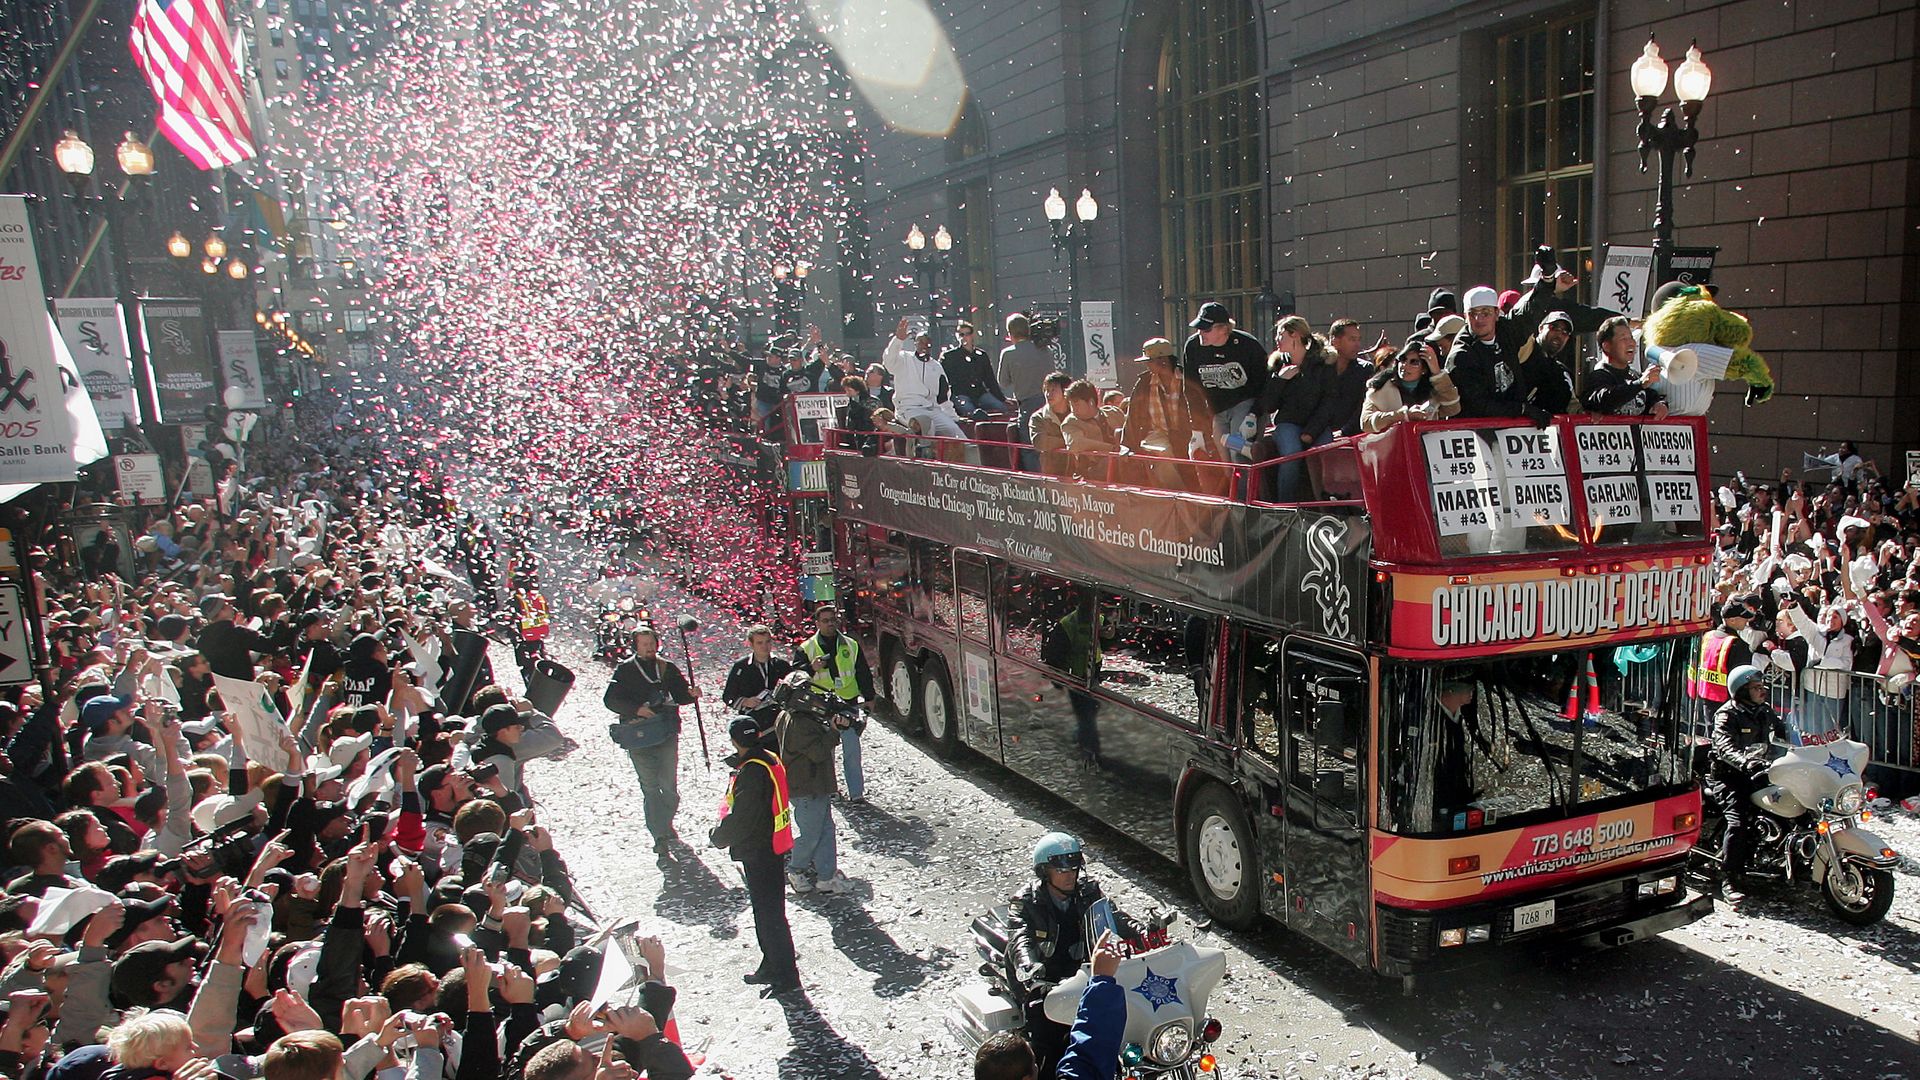 Photo of confetti thrown from a bus during a victory parade